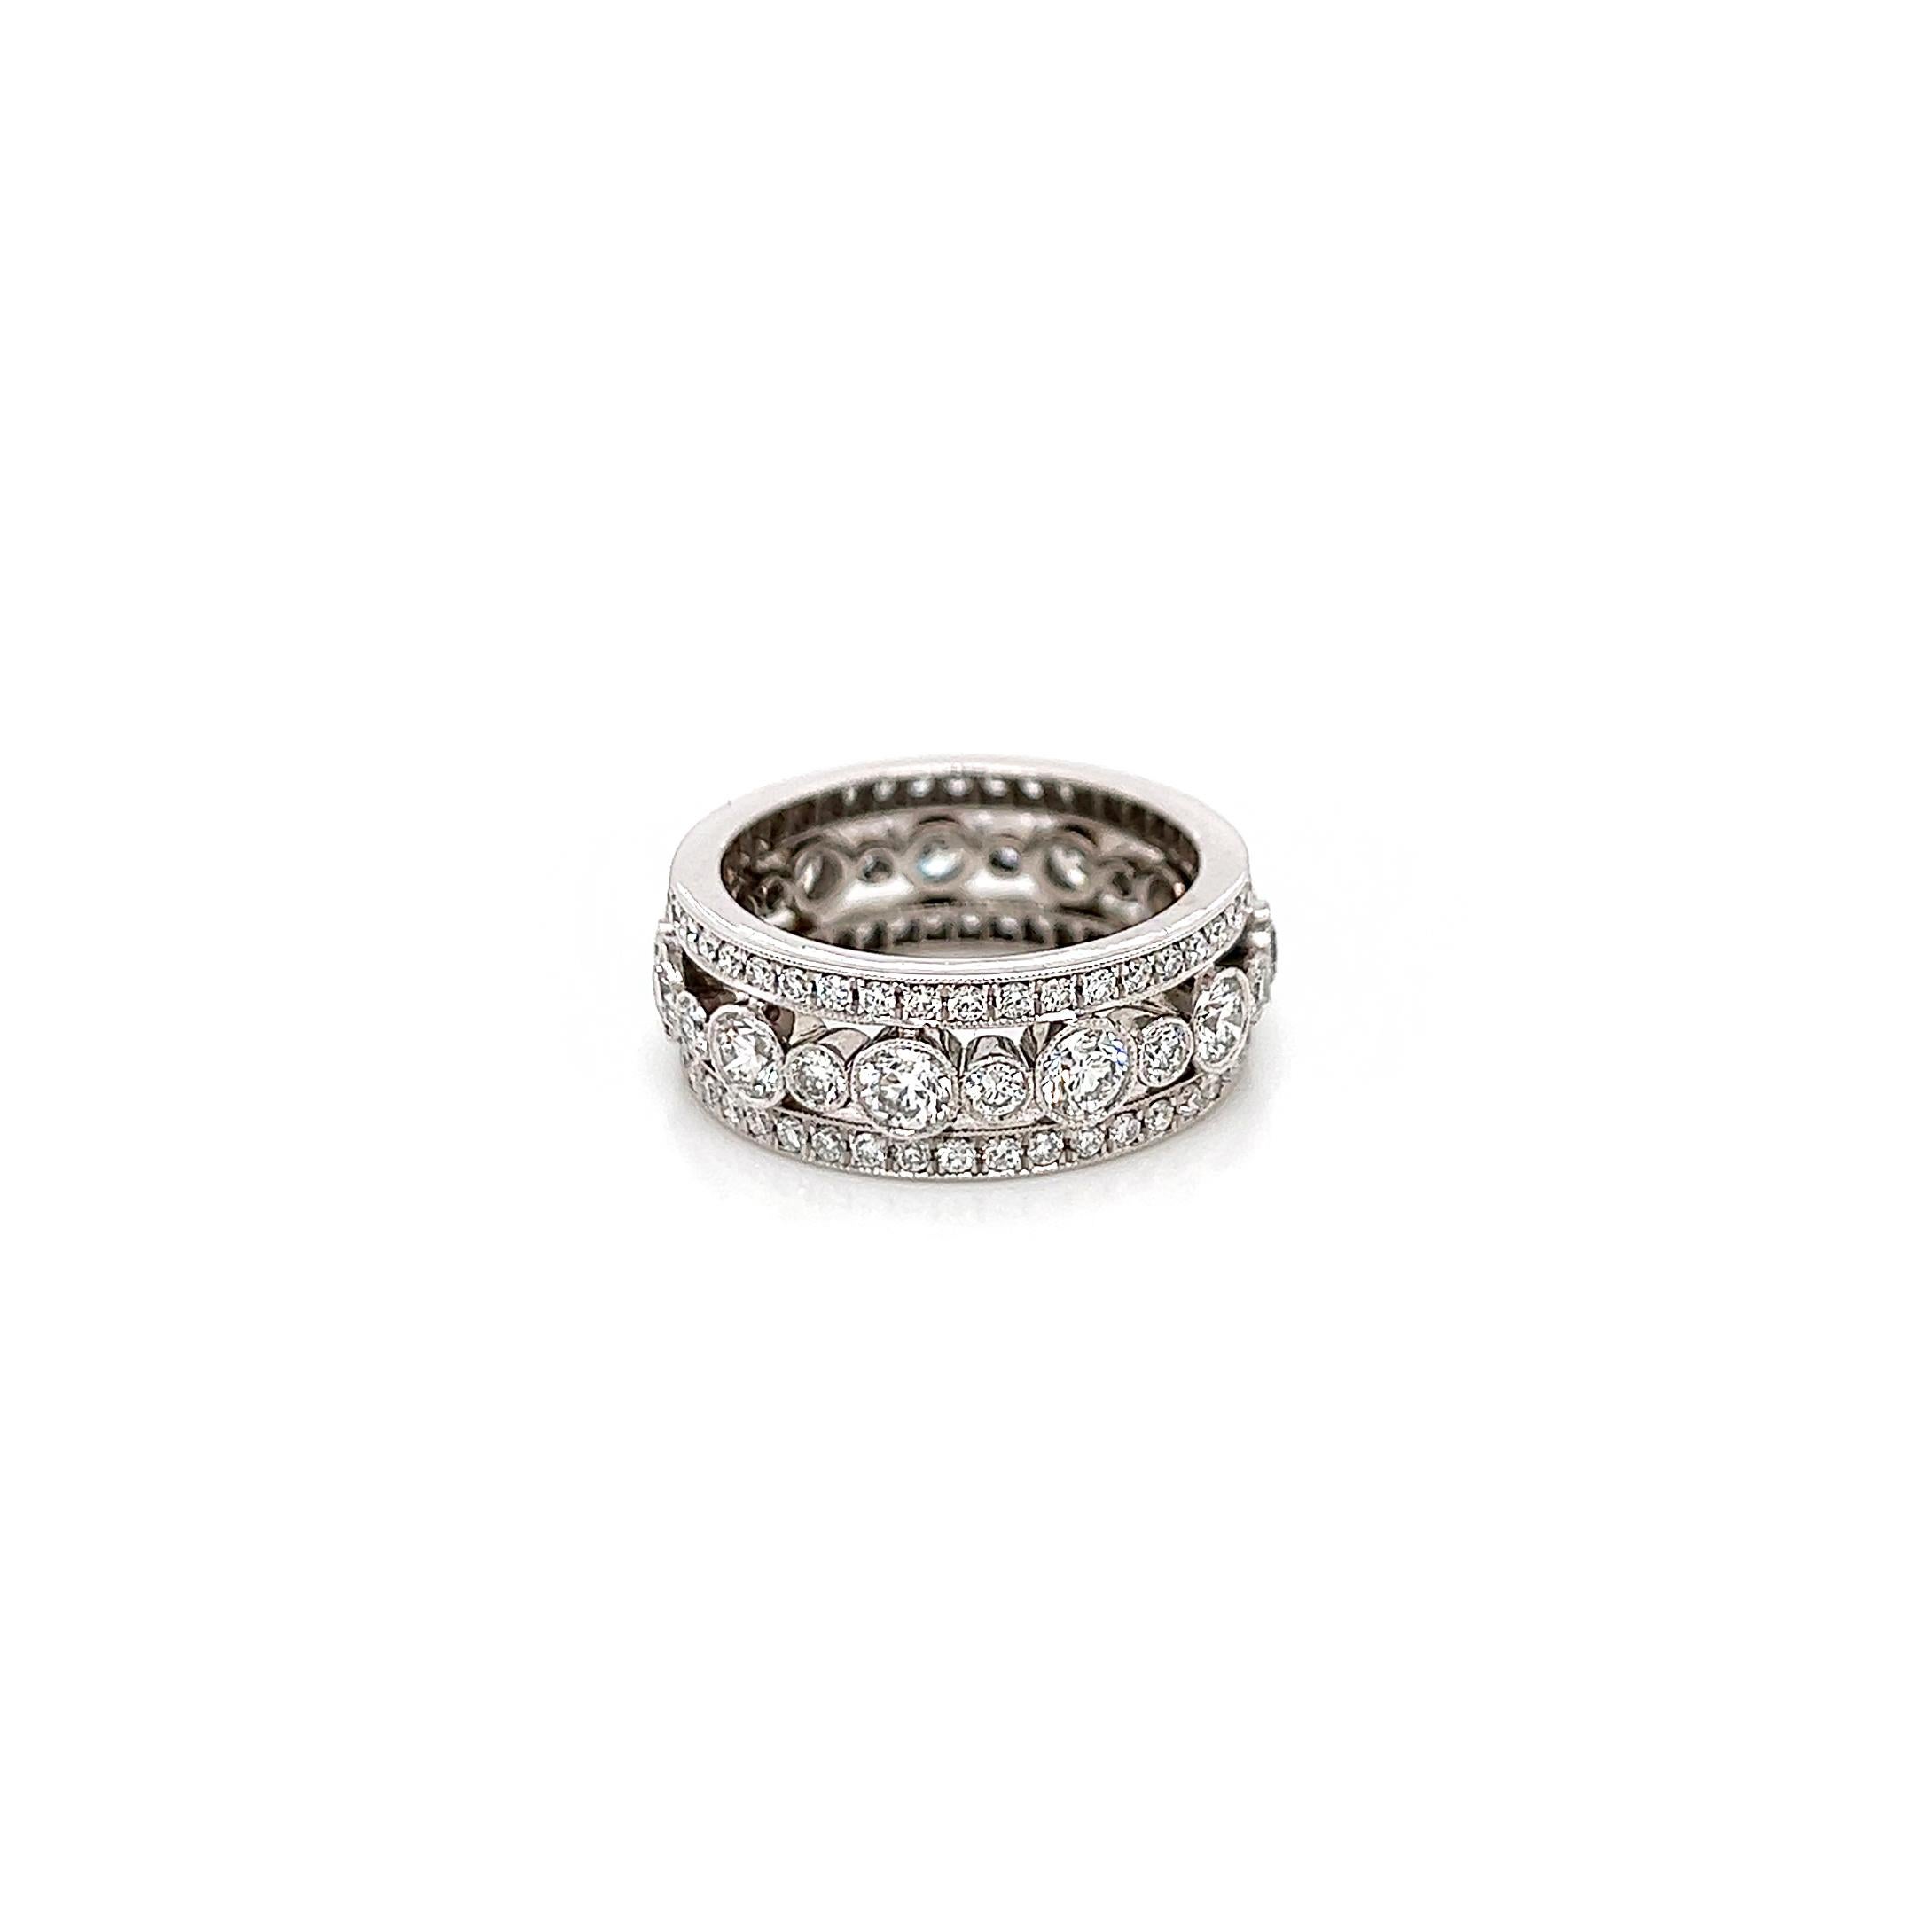 2.49 Total Carat Ladies Prong & Bezel-Set Diamond Band with Antique Milgrain 

-Metal Type: Platinum
-2.49 Carat Round Natural Diamonds
-E-FColor
-VS Clarity
-Size 6.5

Made in New York City.